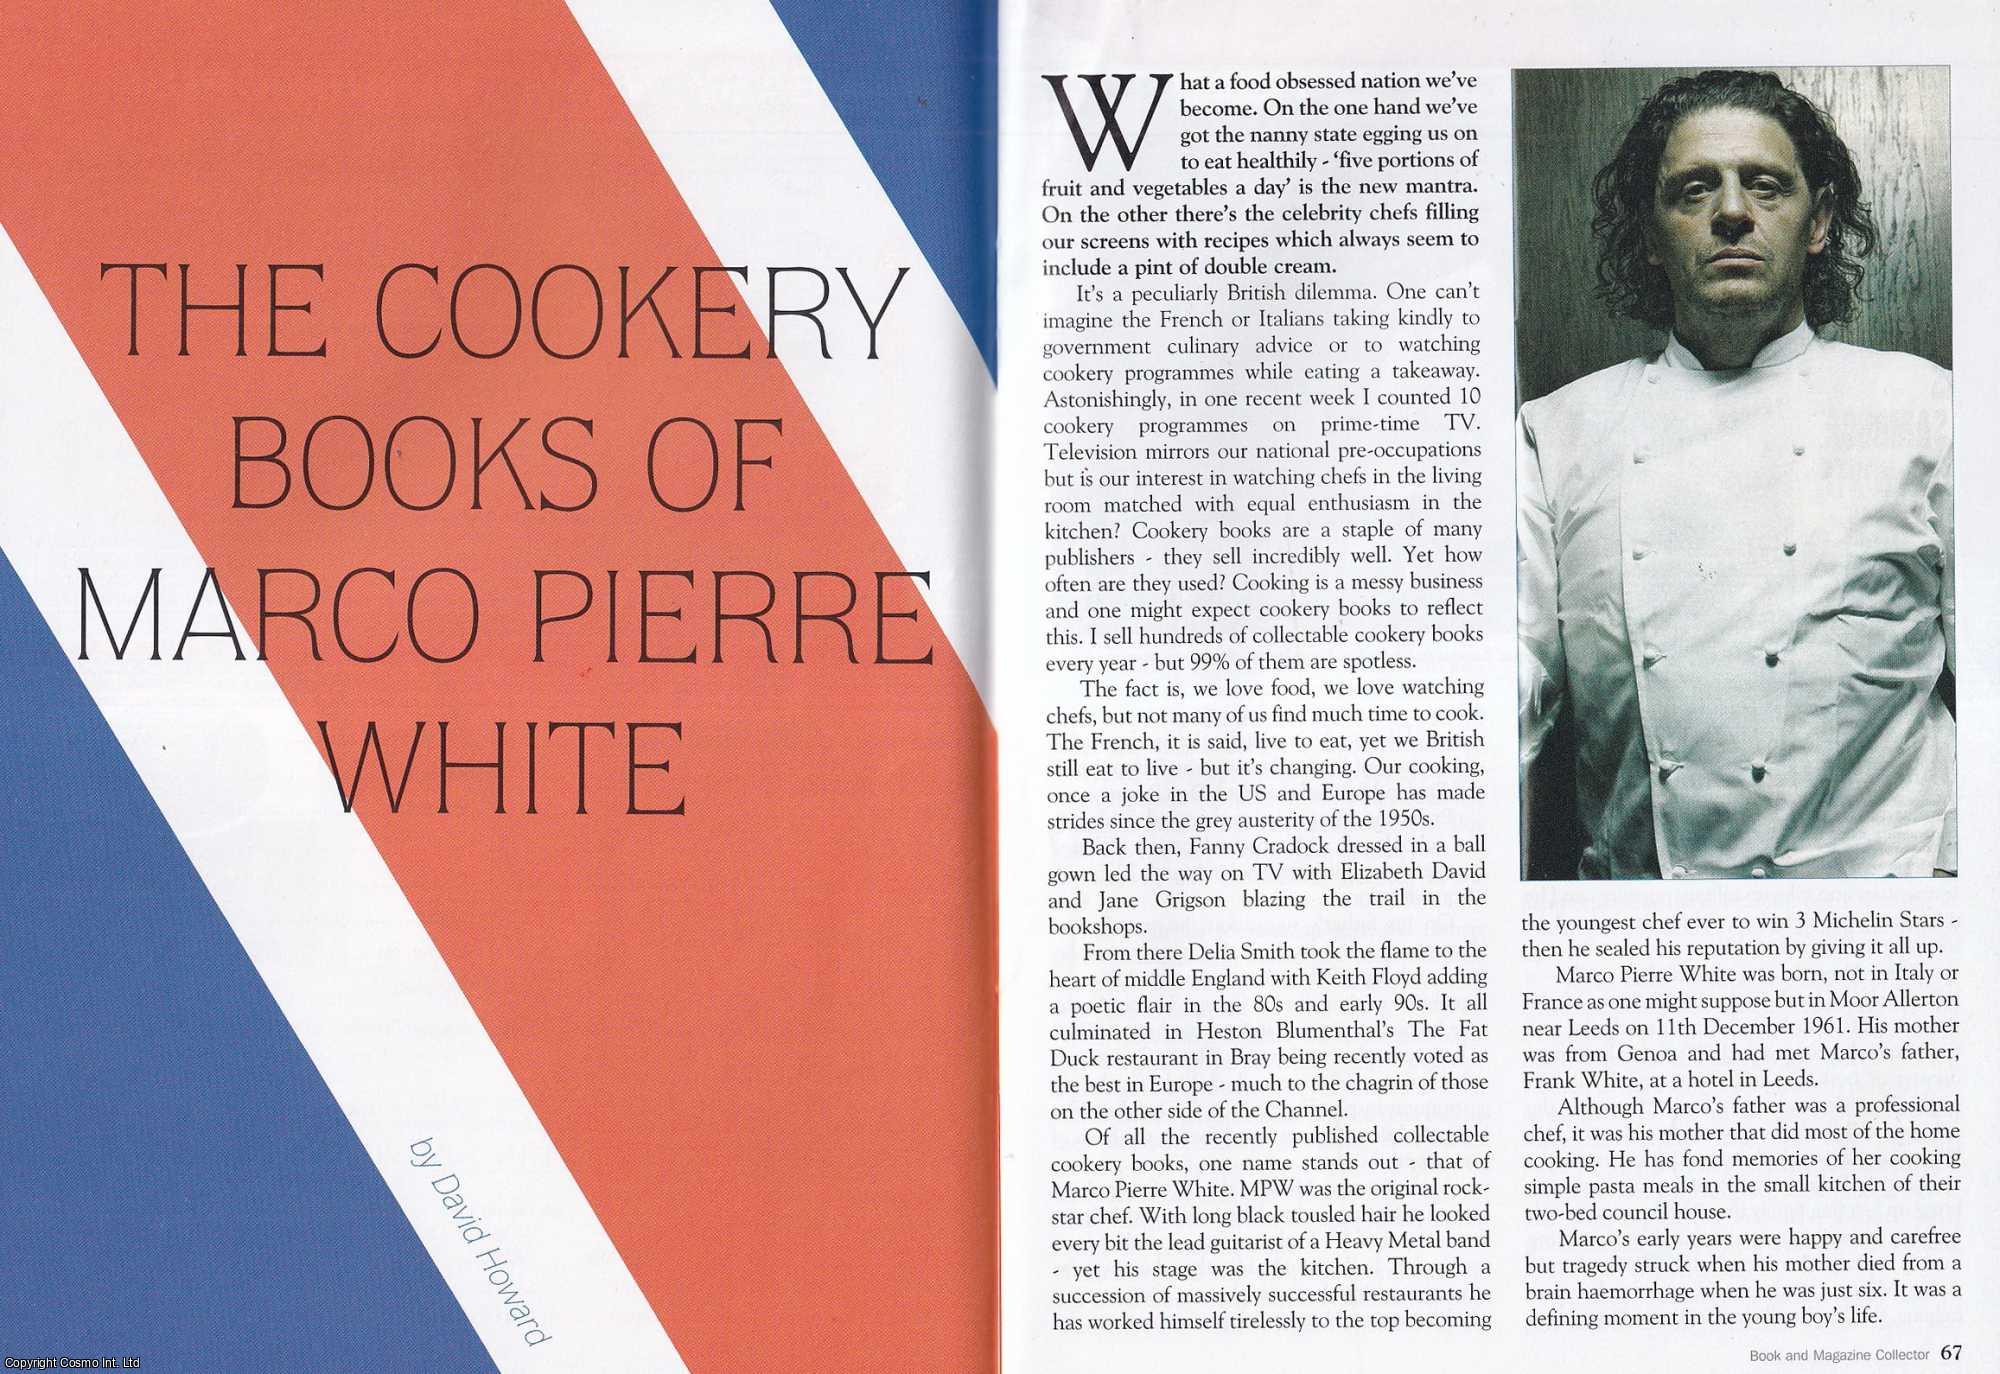 David Howard - The Cookery Books of Marco Pierre White. This is an original article separated from an issue of The Book & Magazine Collector publication, 2007.